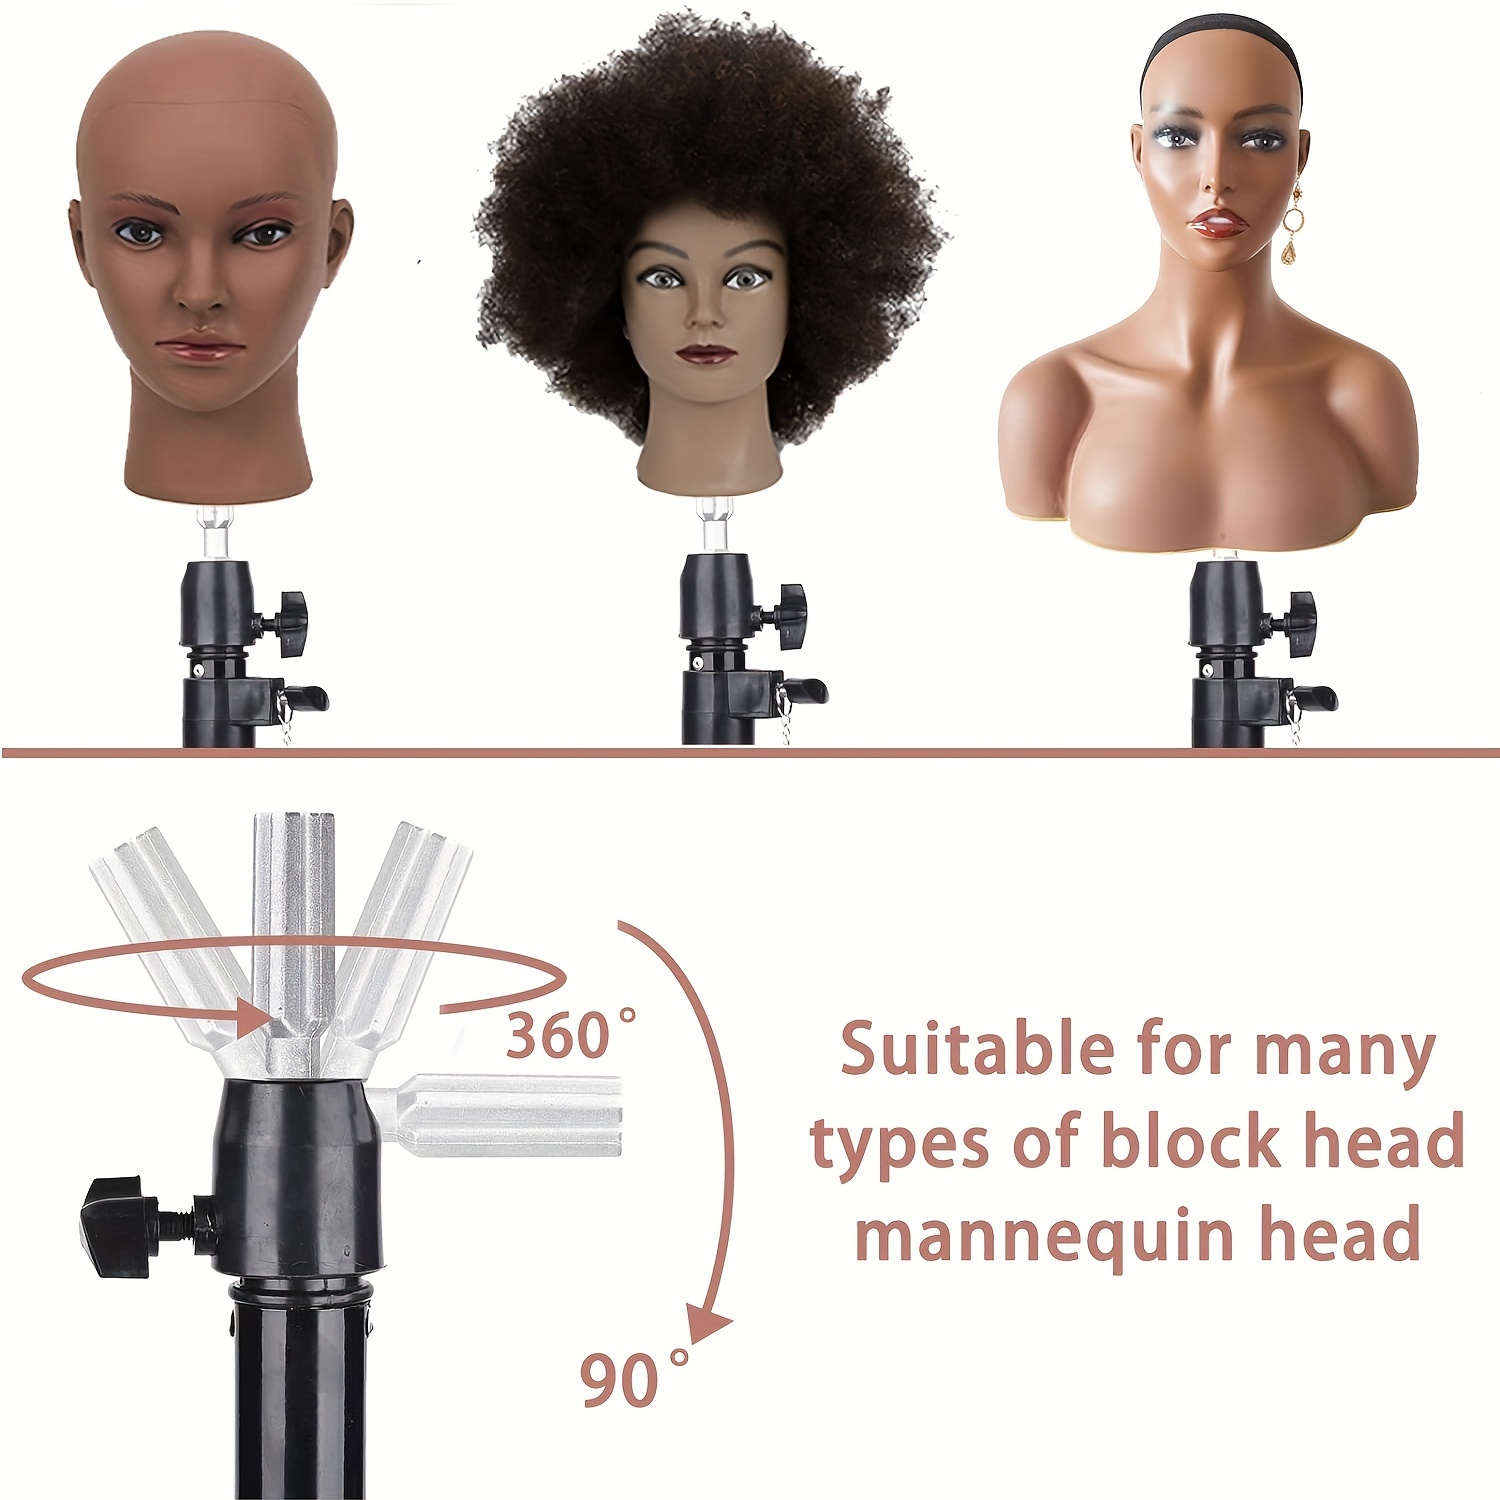 22 Inch Wig Head/Stand Tripod With Head, Canvas, Mannequin Head